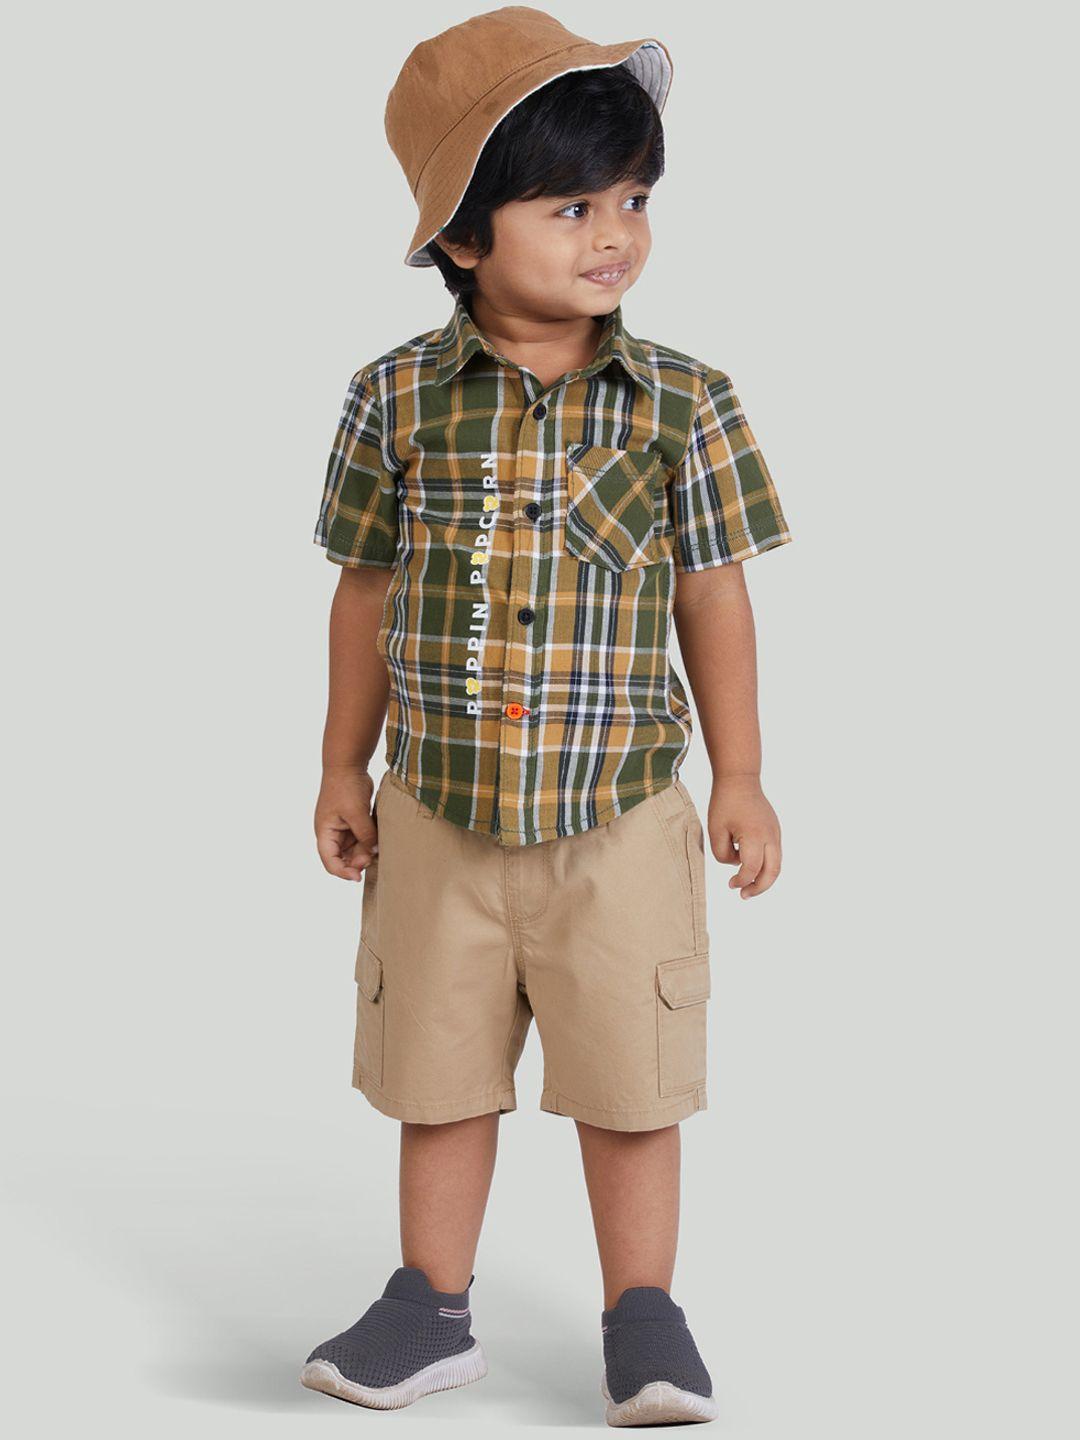 zalio boys green & brown checked shirt with shorts & hat